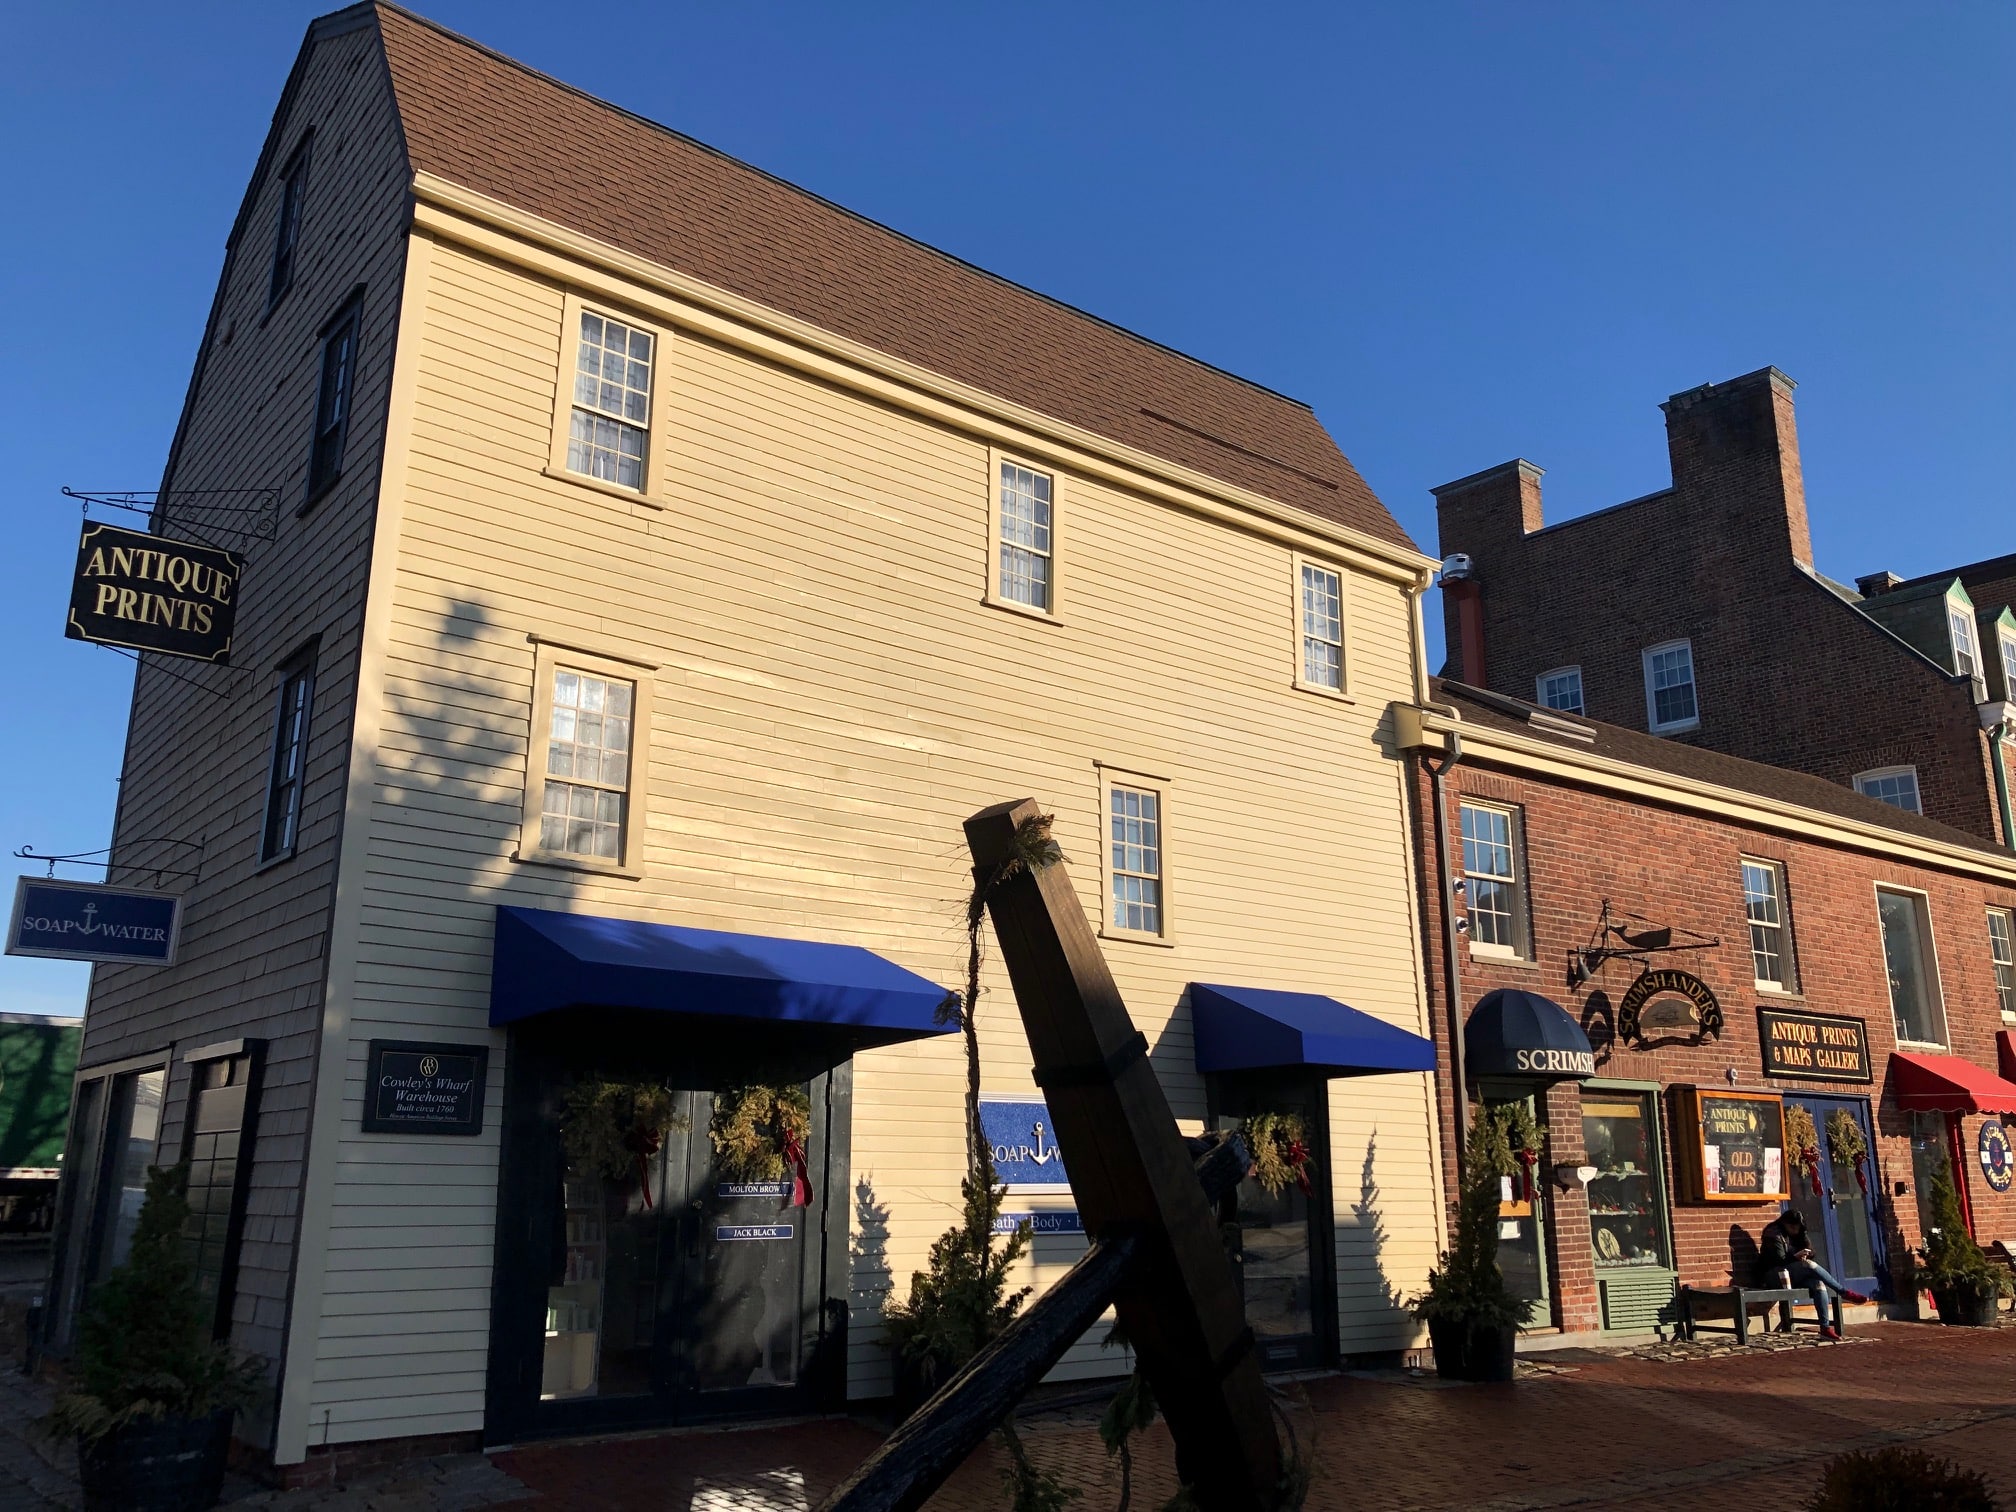 Anne Hall Antique Prints and the Rare Maps Gallery has expanded, to 10 Bowen's Wharf, in Newport Rhode Island. We are still at the Anchor of Newport. You will find us upstairs, loaded with historical engravings, antique lithographs, and thousands of maps over 100 years old.